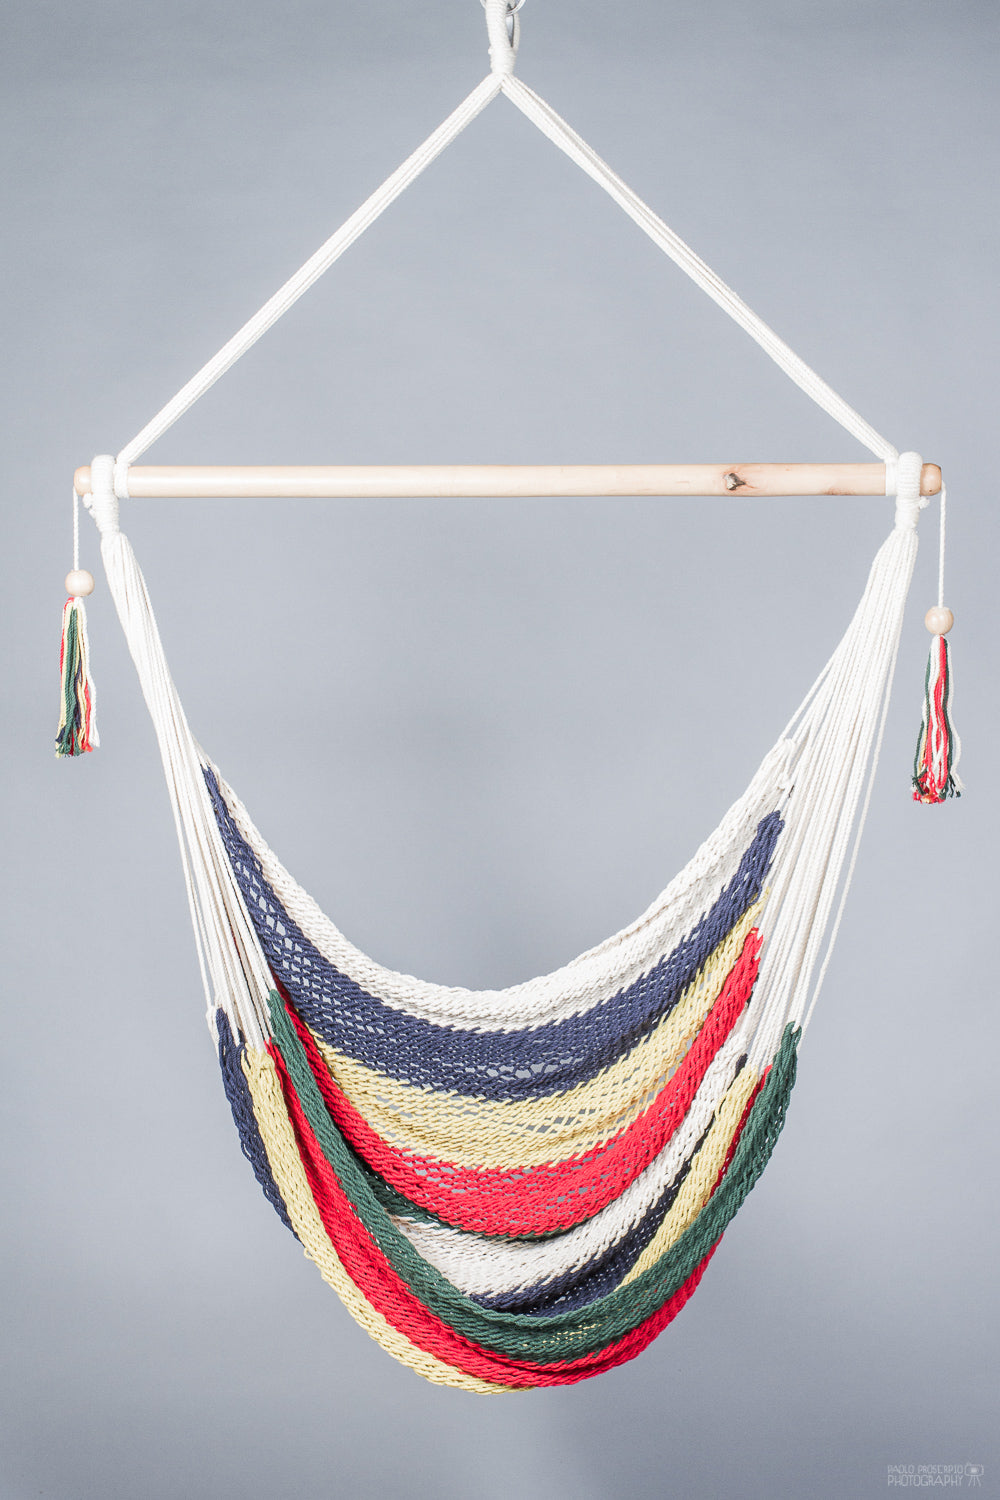 hammock chair of different colors. Grey background